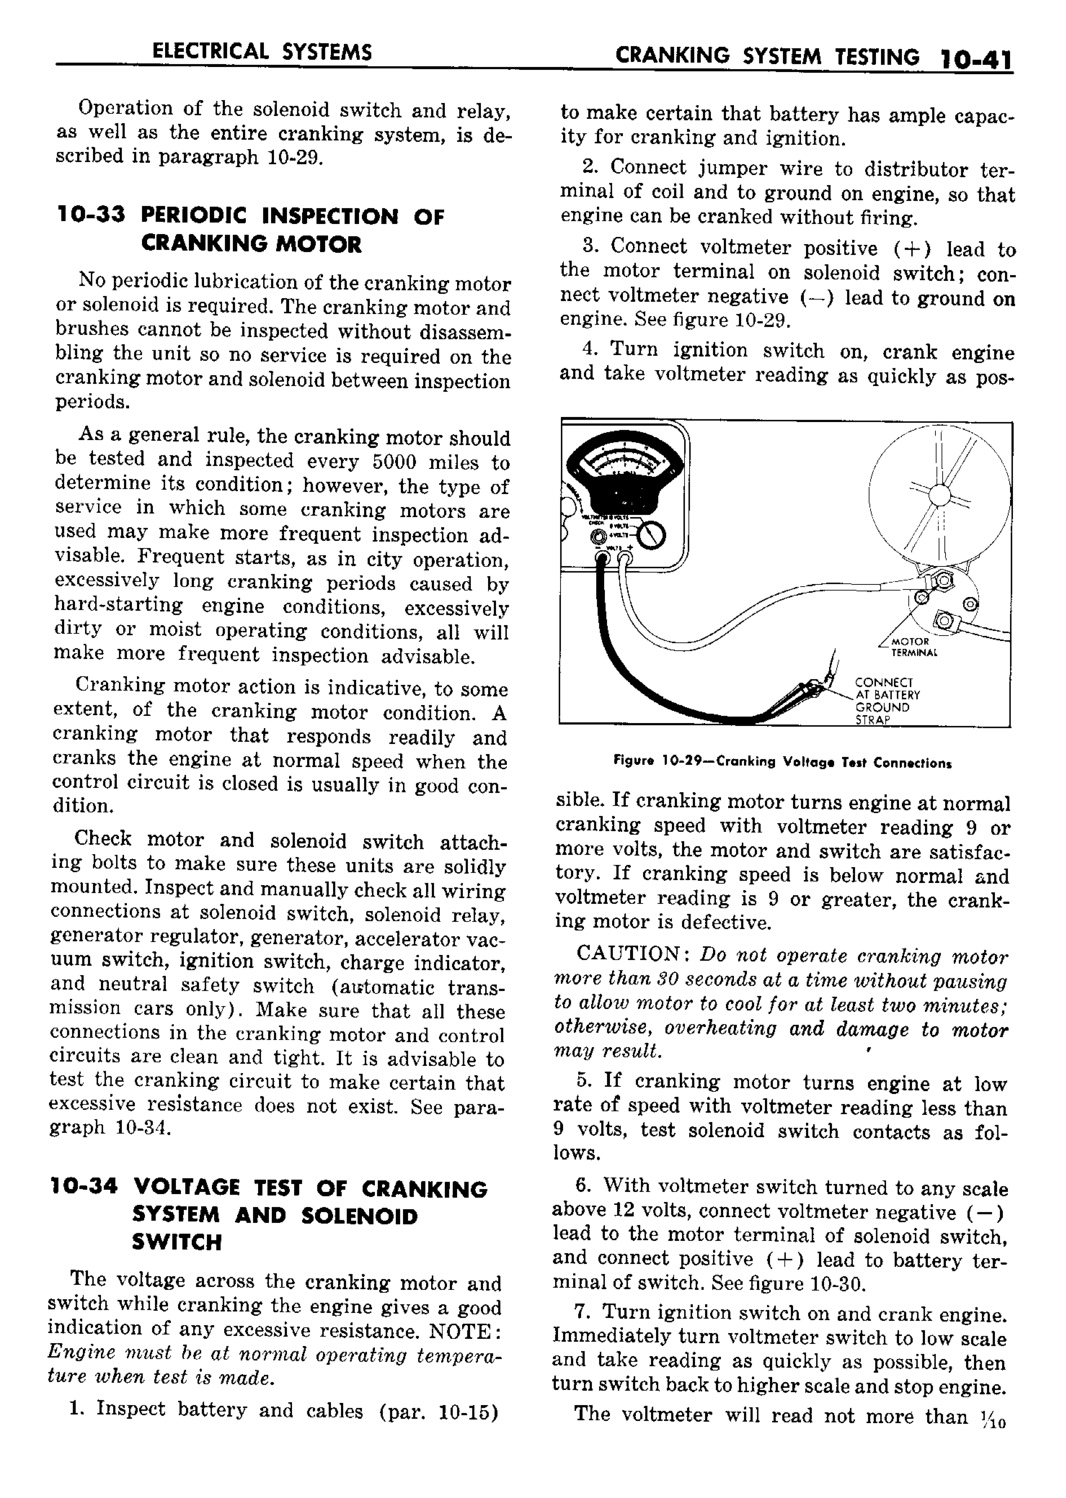 n_11 1960 Buick Shop Manual - Electrical Systems-041-041.jpg